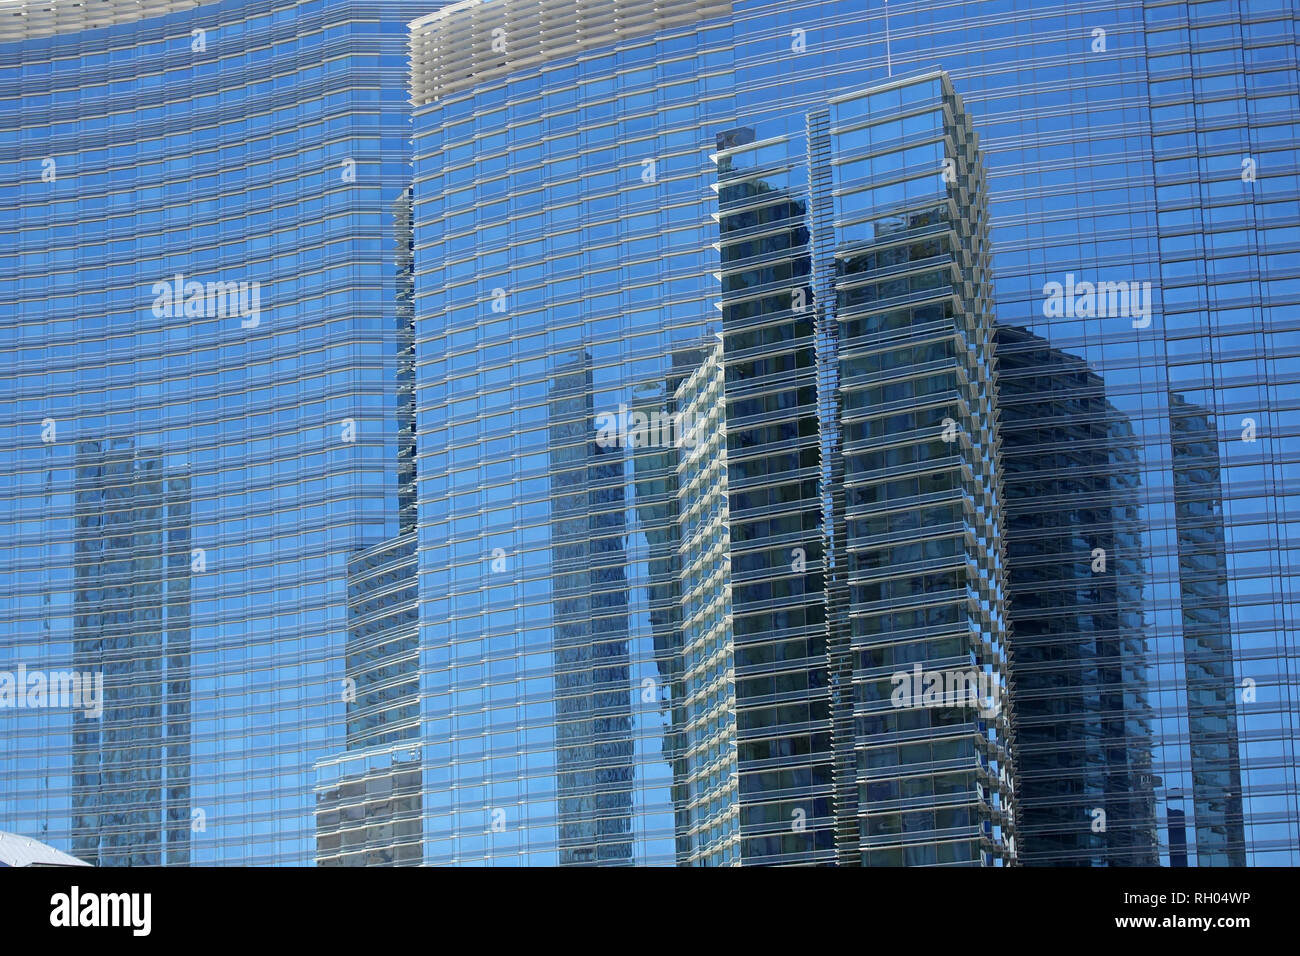 A close up view of windows outside of casinos in Las Vegas. Stock Photo